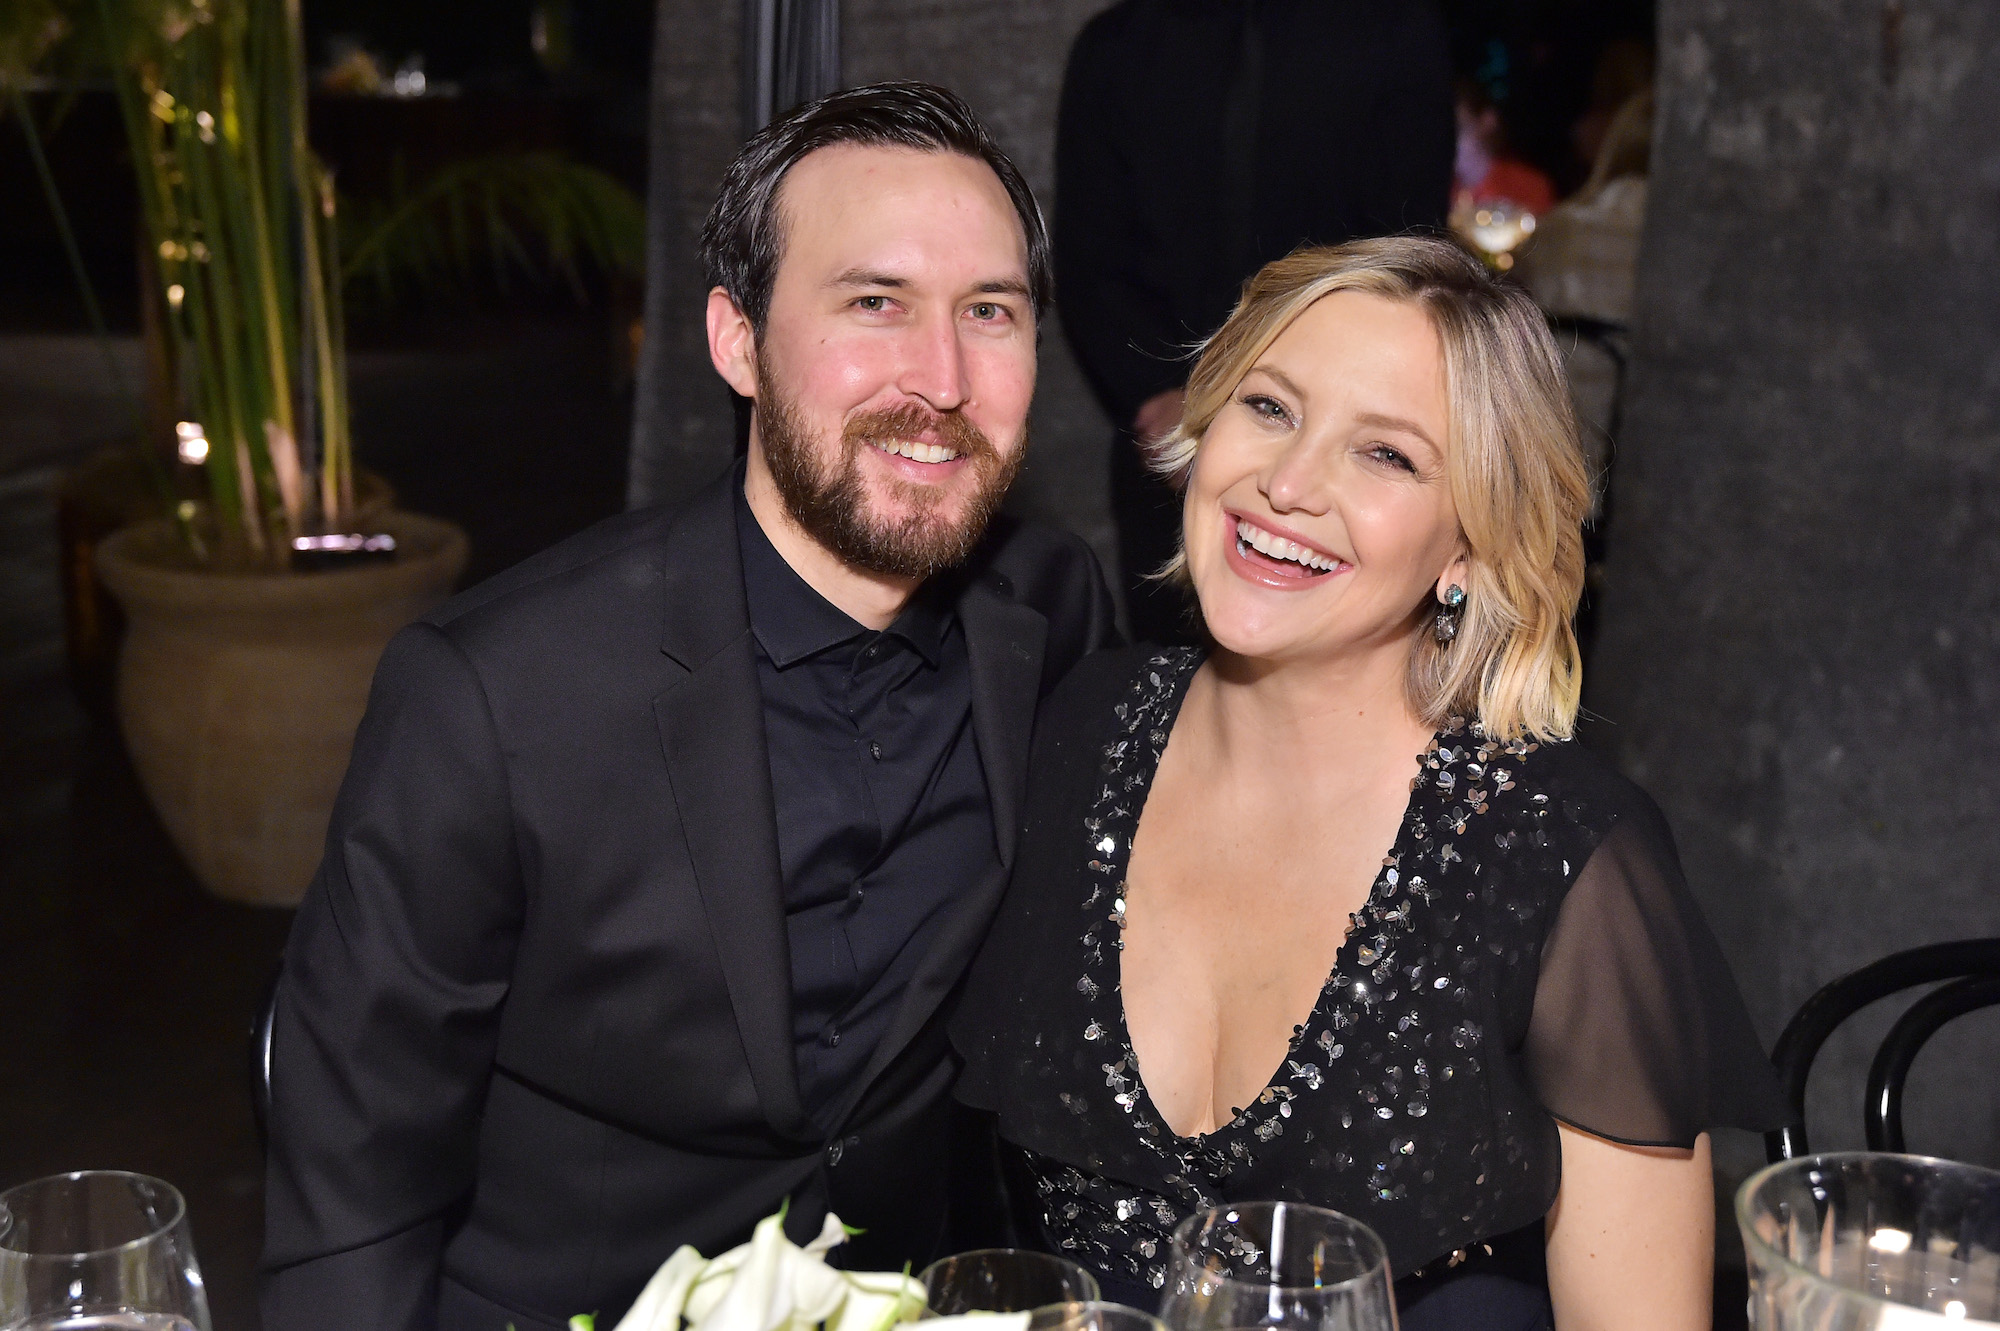 Kate Hudson Once Revealed She Never Thought She’d Date Danny Fujikawa: ‘No Moves Were Made’